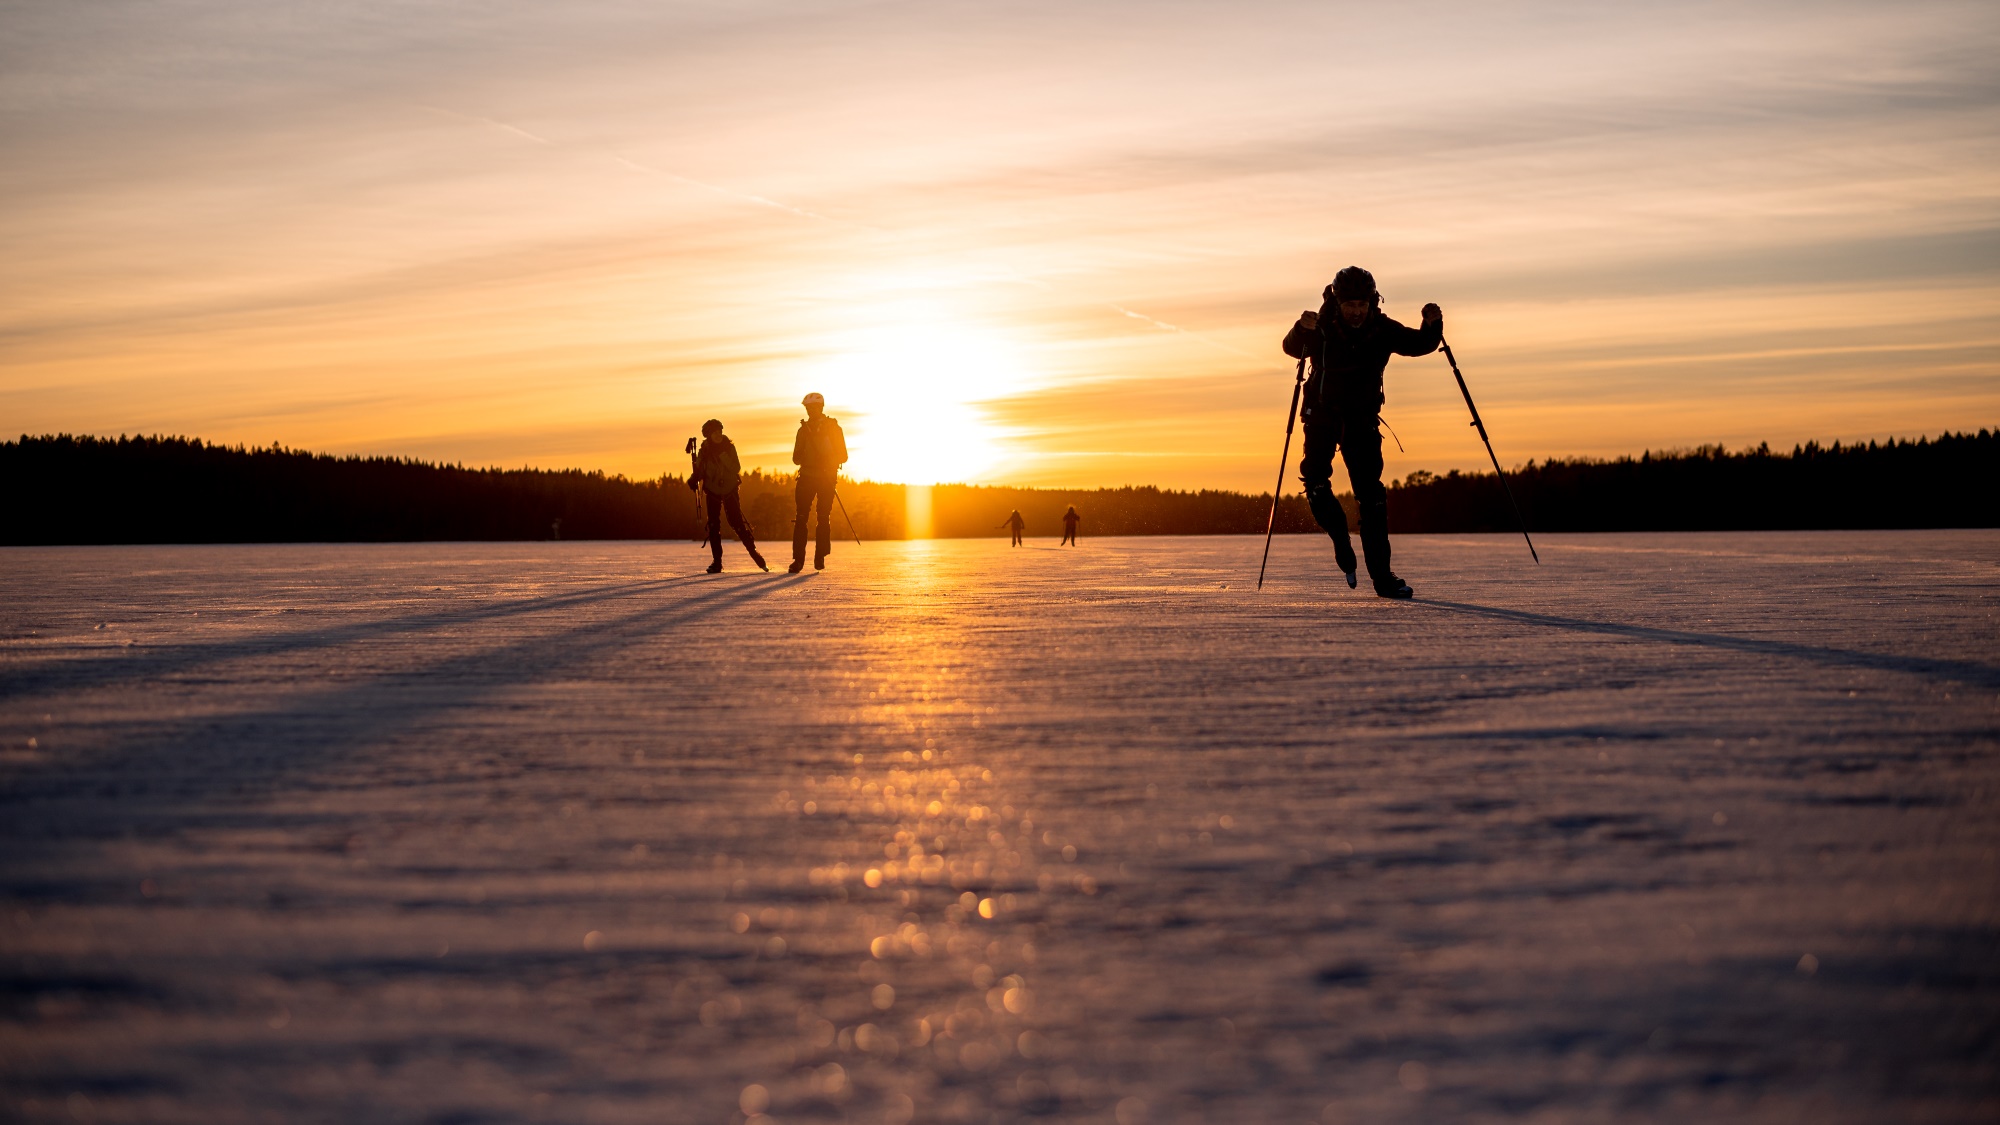 Sunsets on frozen lakes are so beautiful!